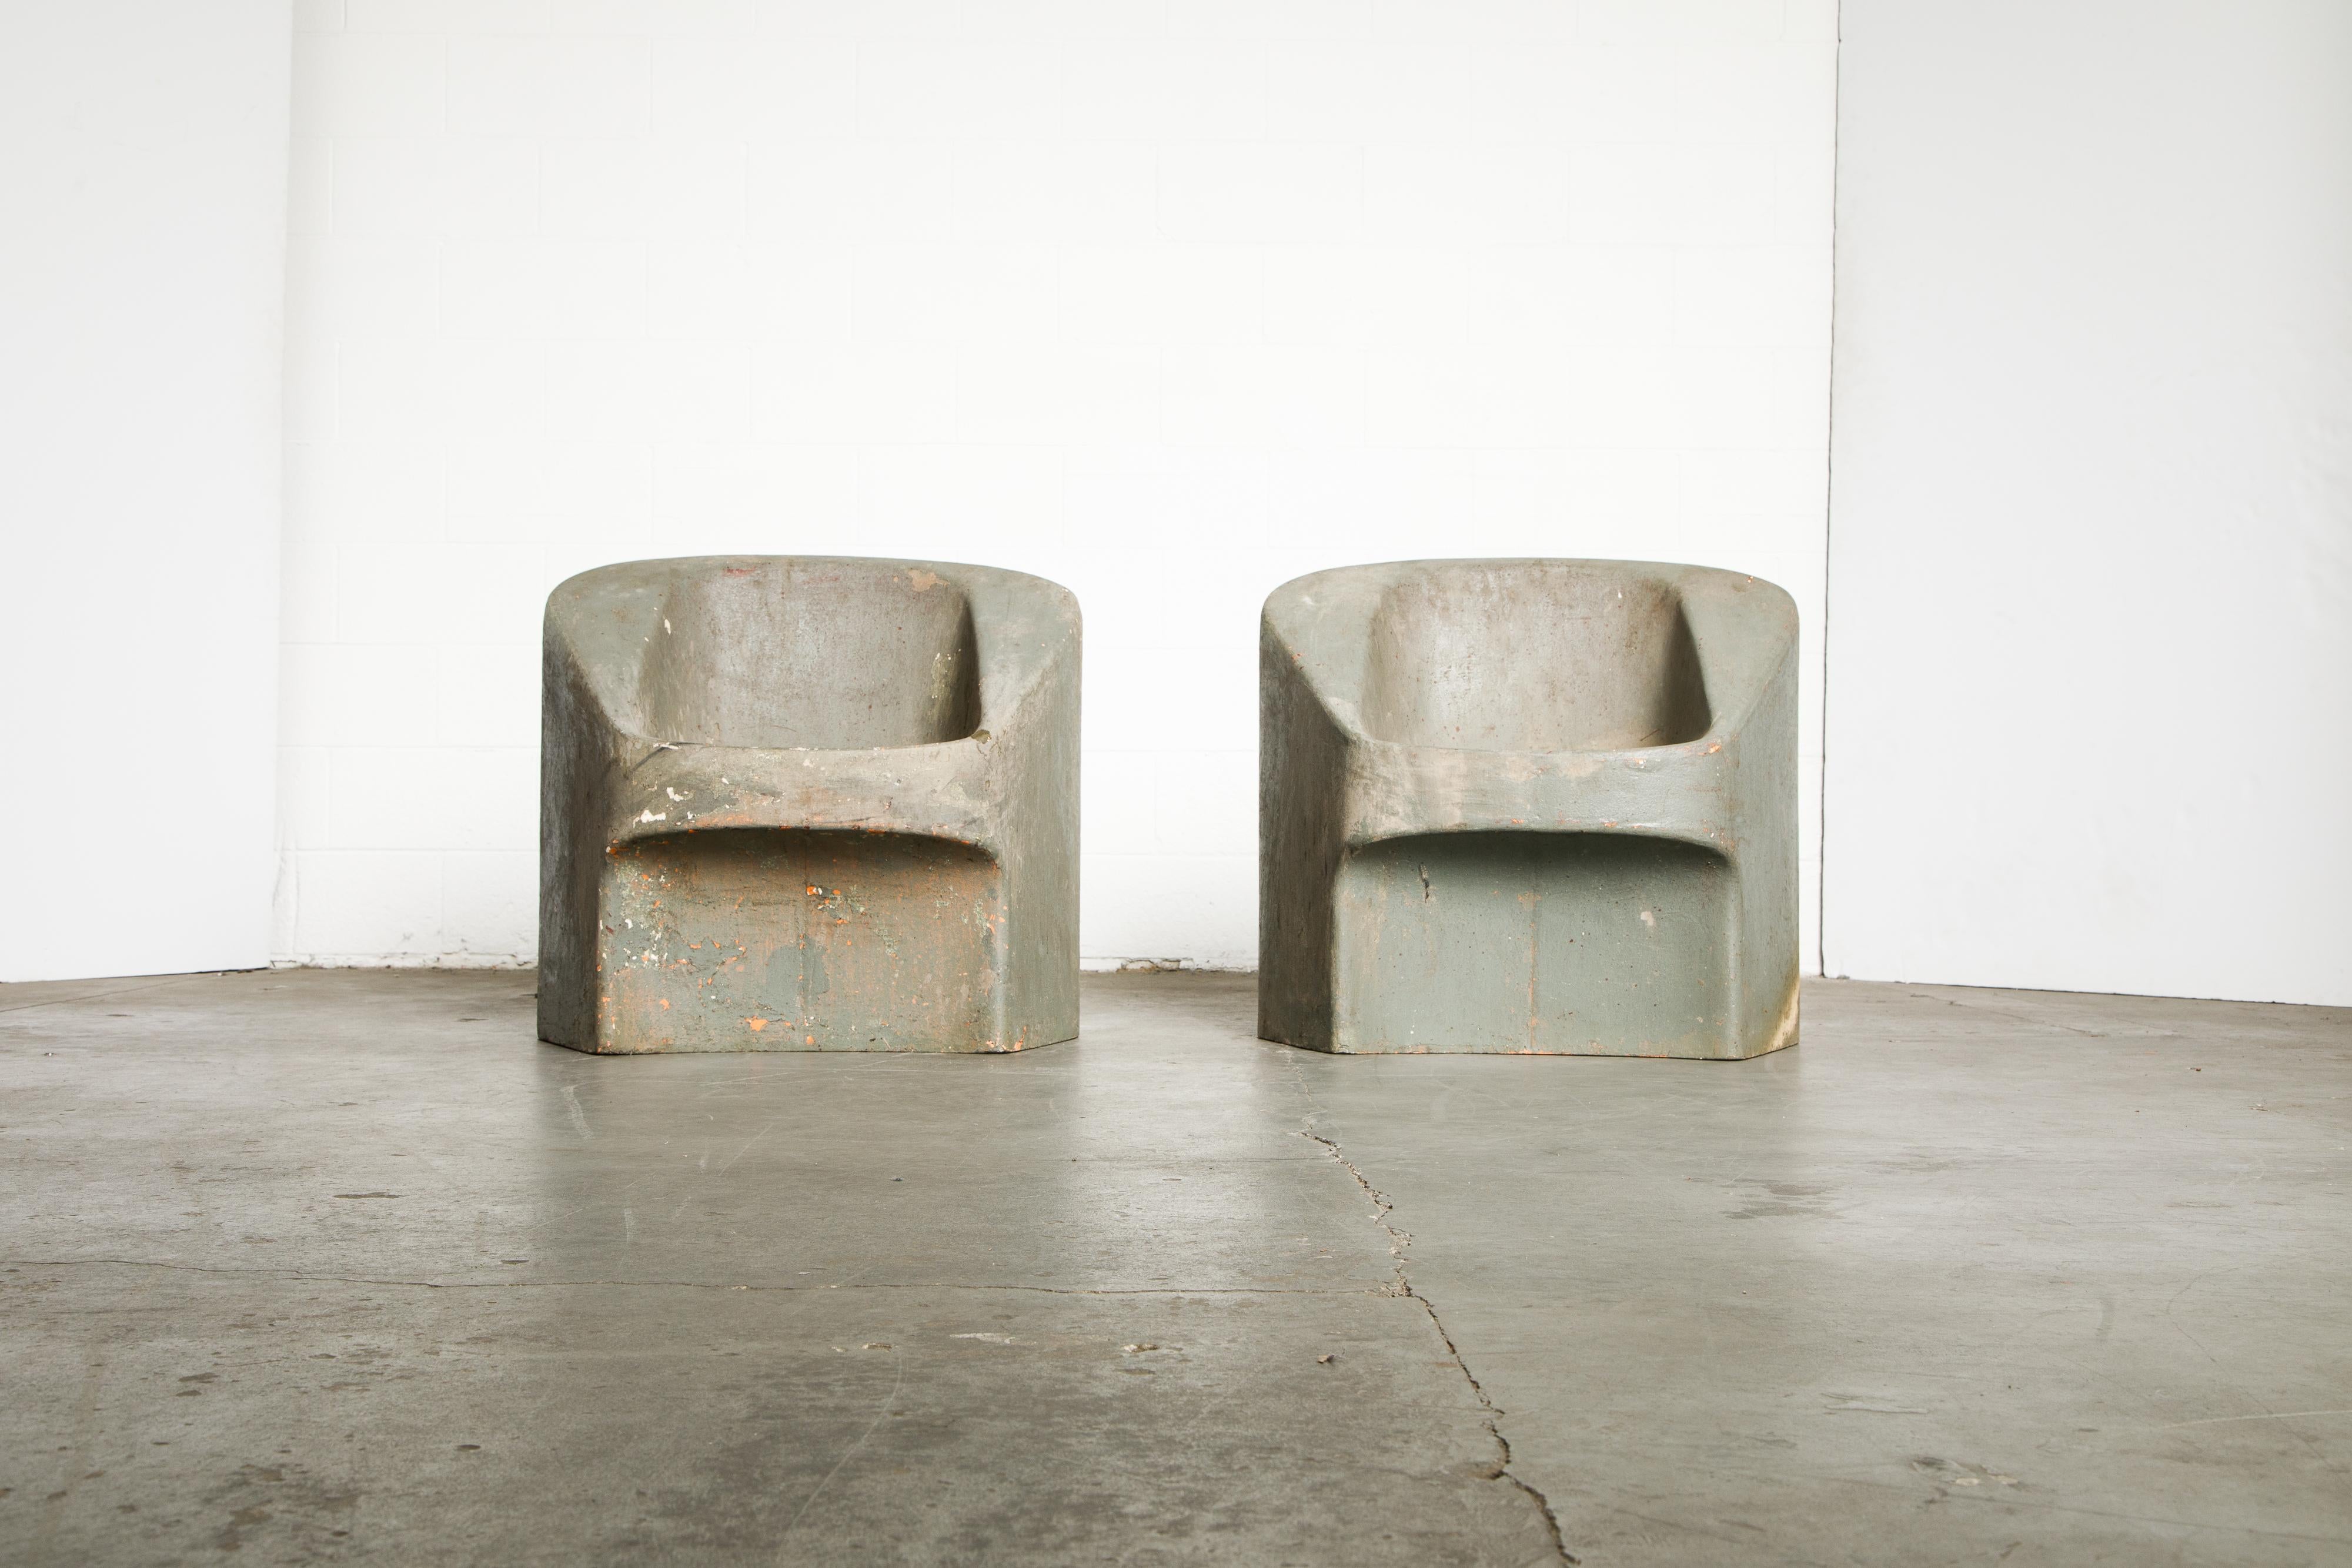 This incredible pair of Modernist concrete garden chairs by Willy Guhl for Eternit (signed with Eternit number embossed stamps) is from 1974 Switzerland and just imported in from a beautiful garden in Brussels. As you can see in the photos, we